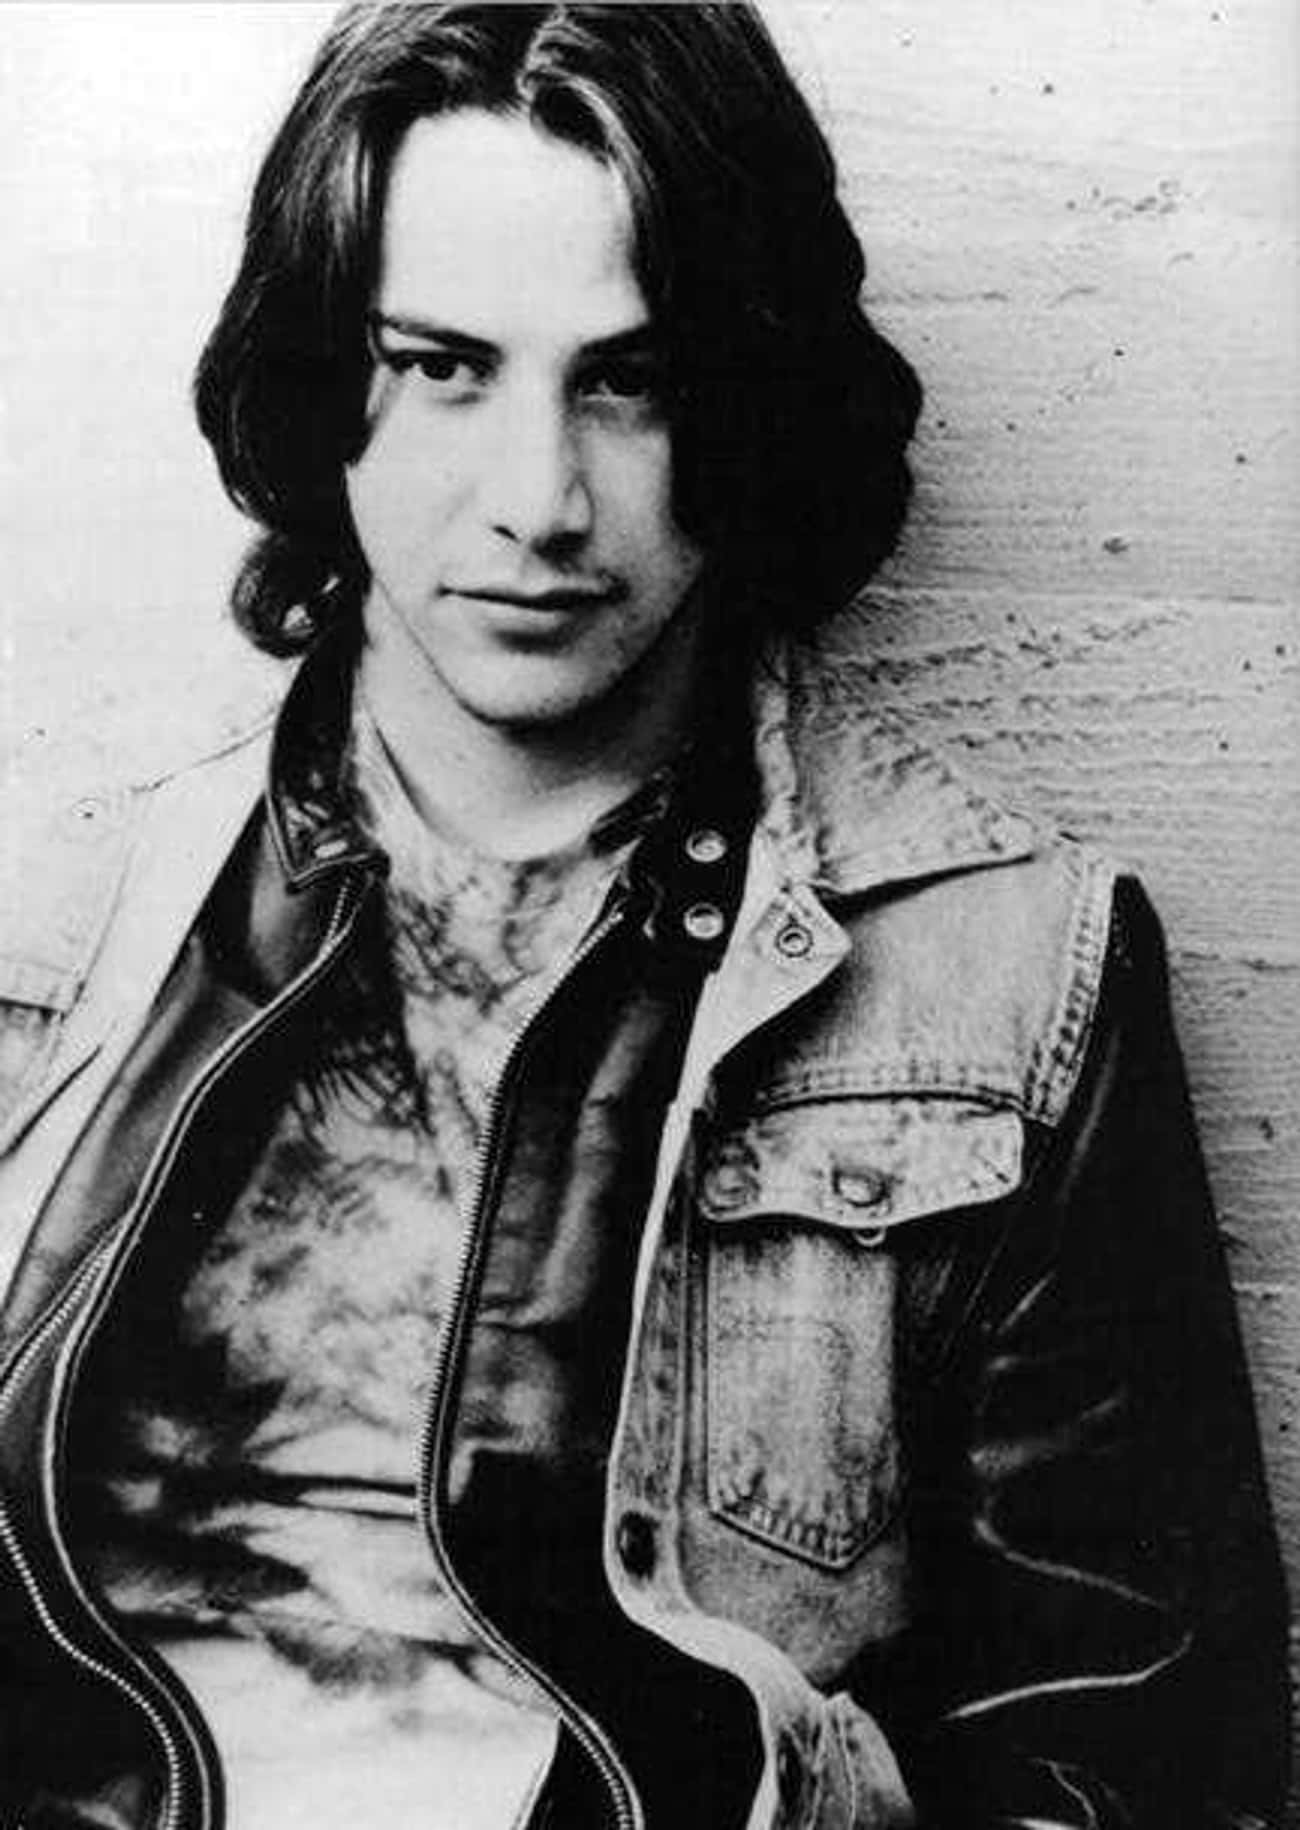 Young Keanu Reeves in Black Leather Jacket with Blue Jean Vest